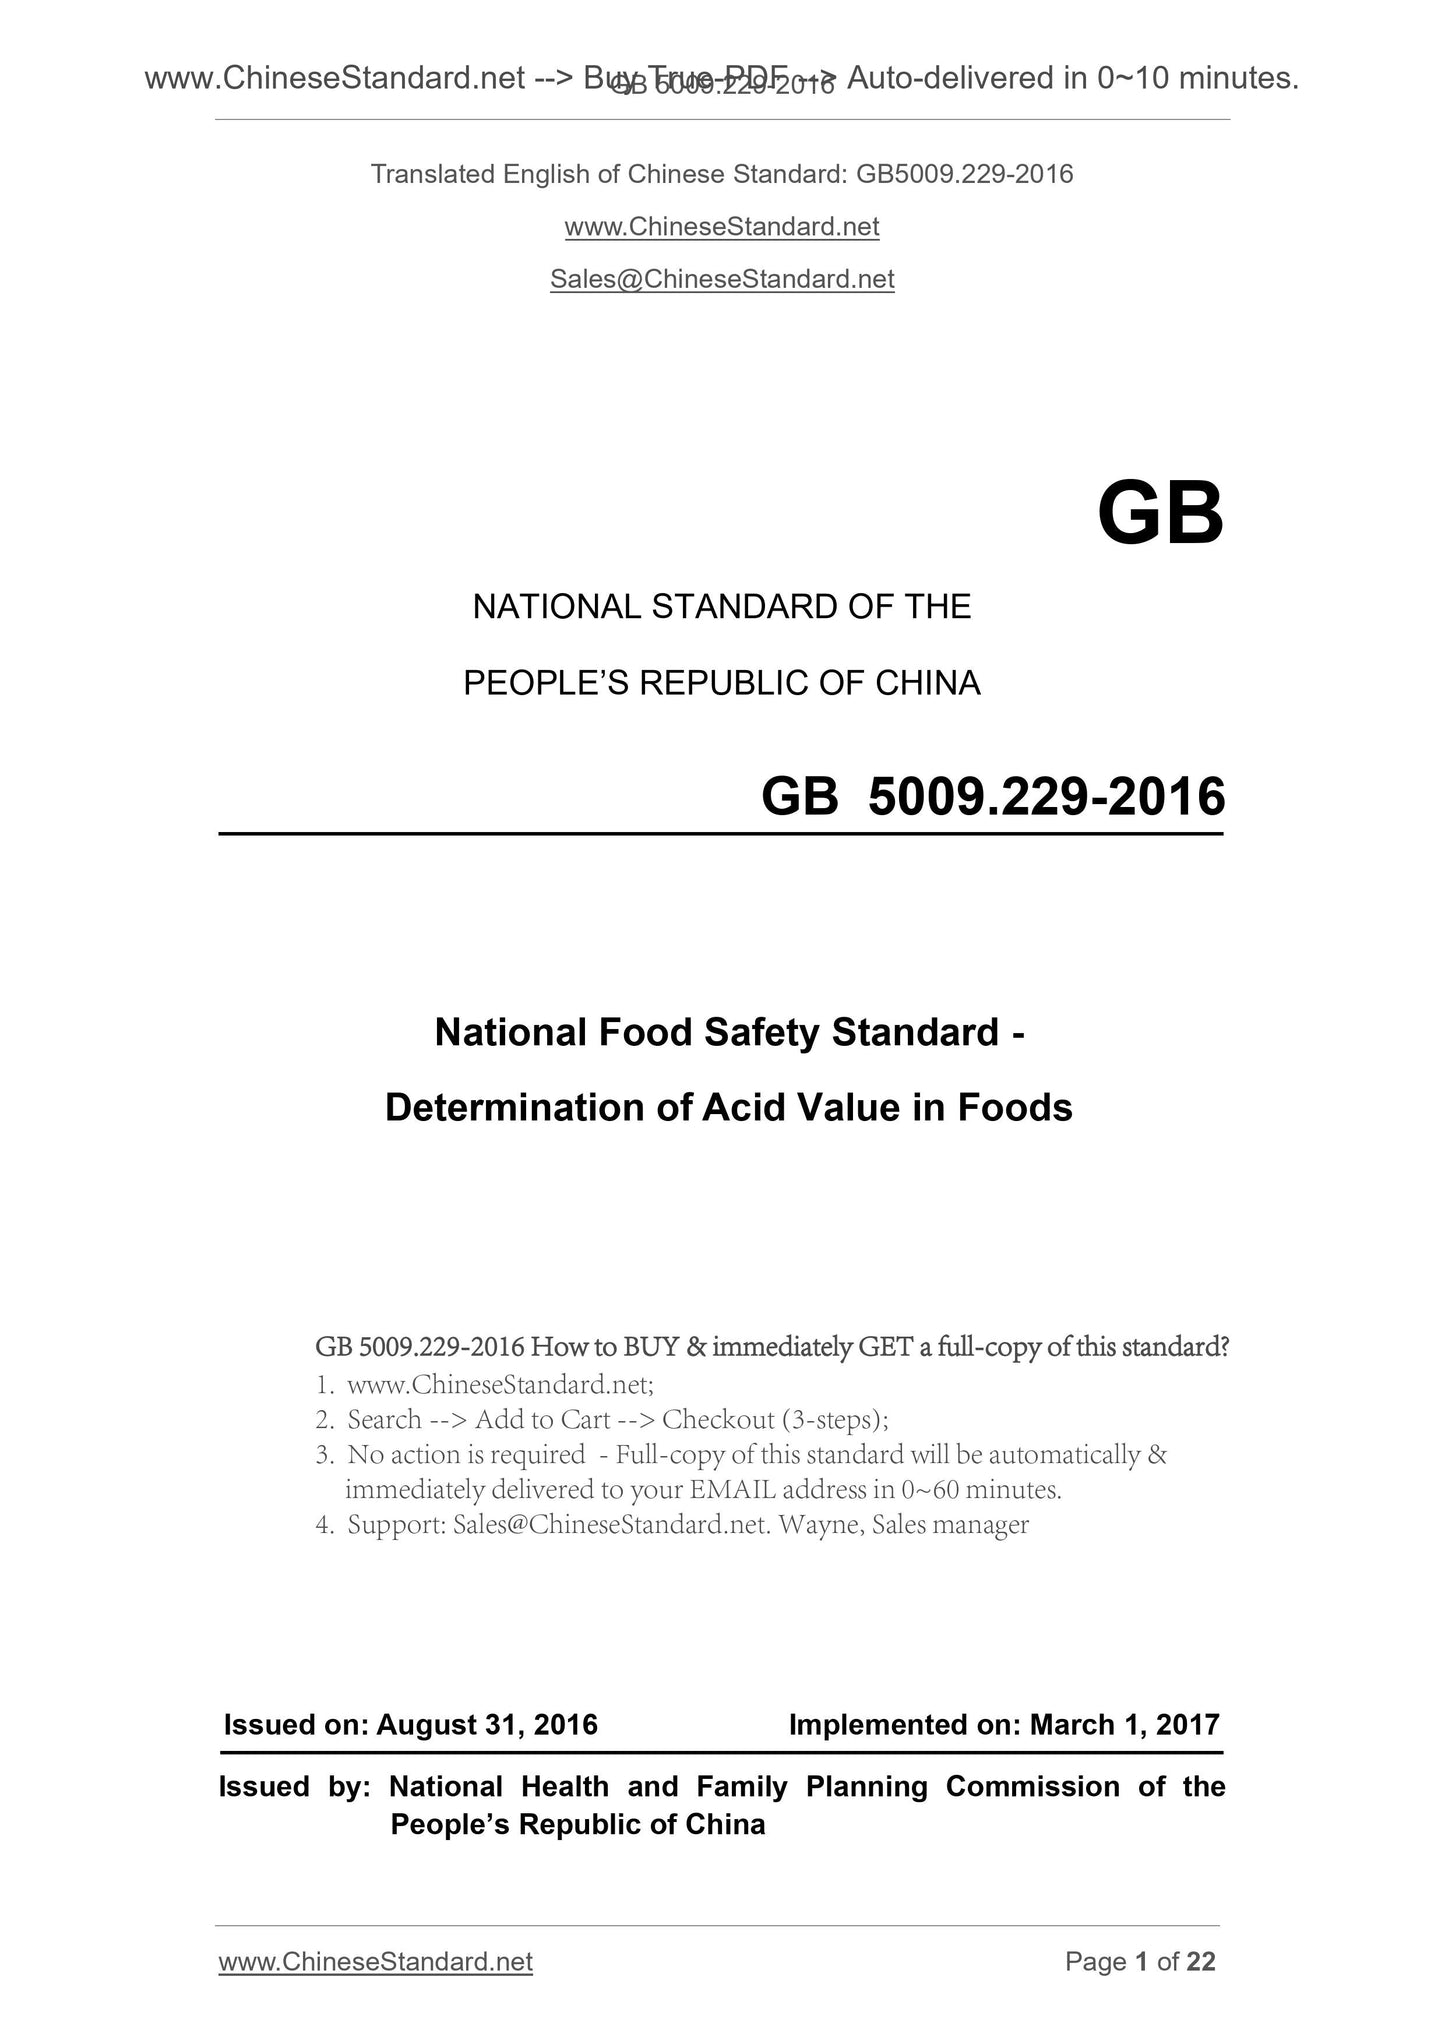 GB 5009.229-2016 Page 1